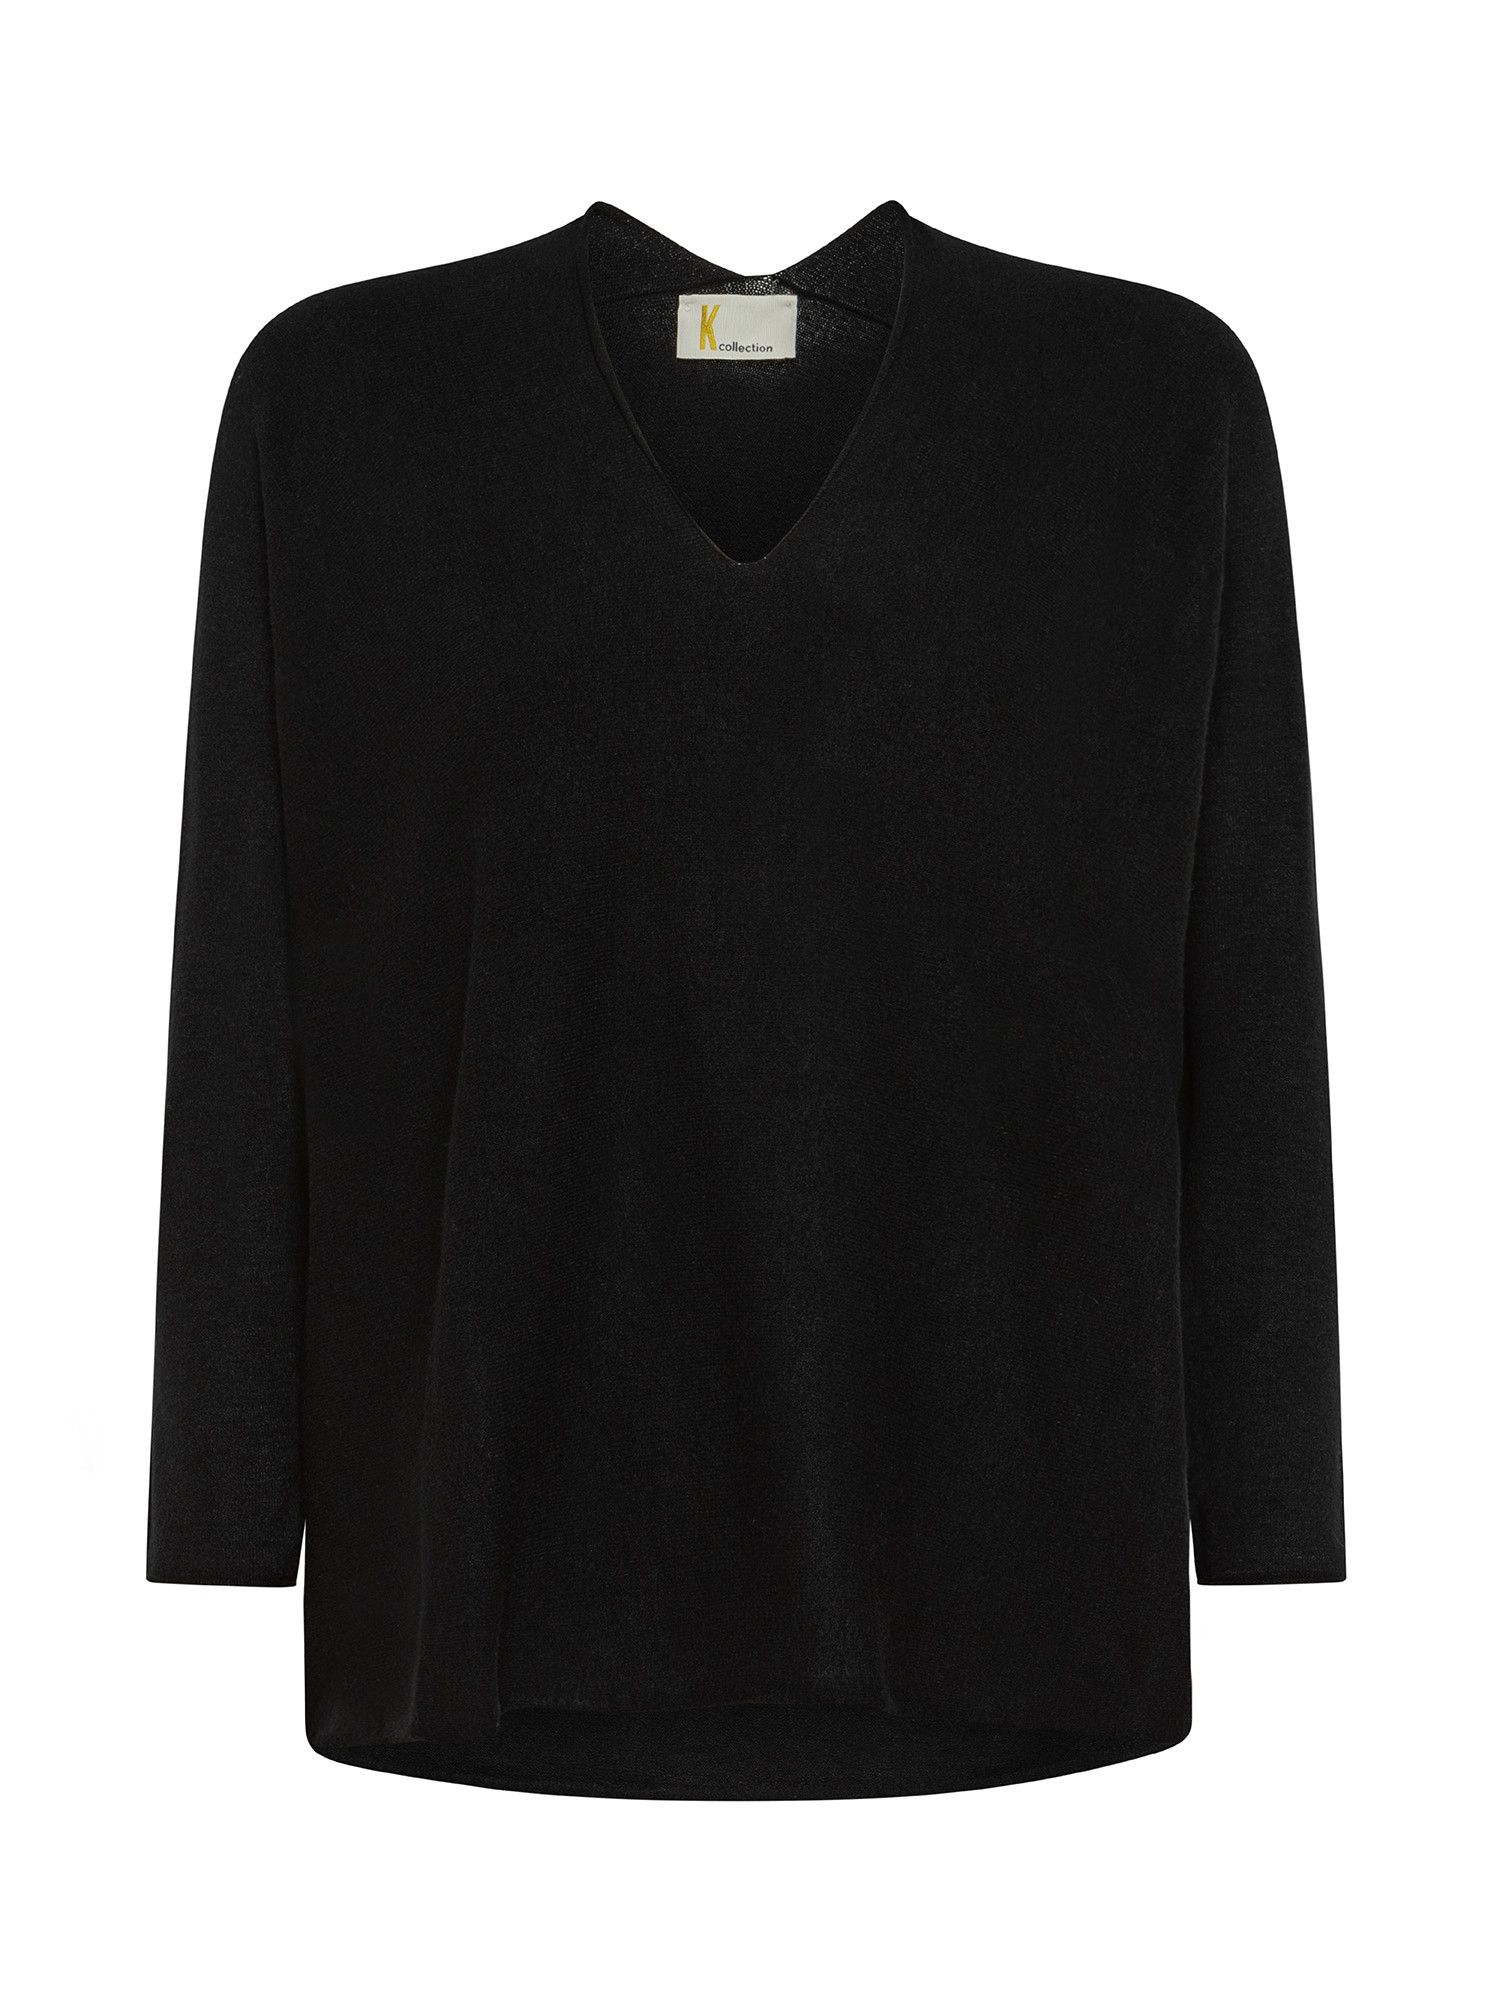 K Collection - Pullover, Nero, large image number 0